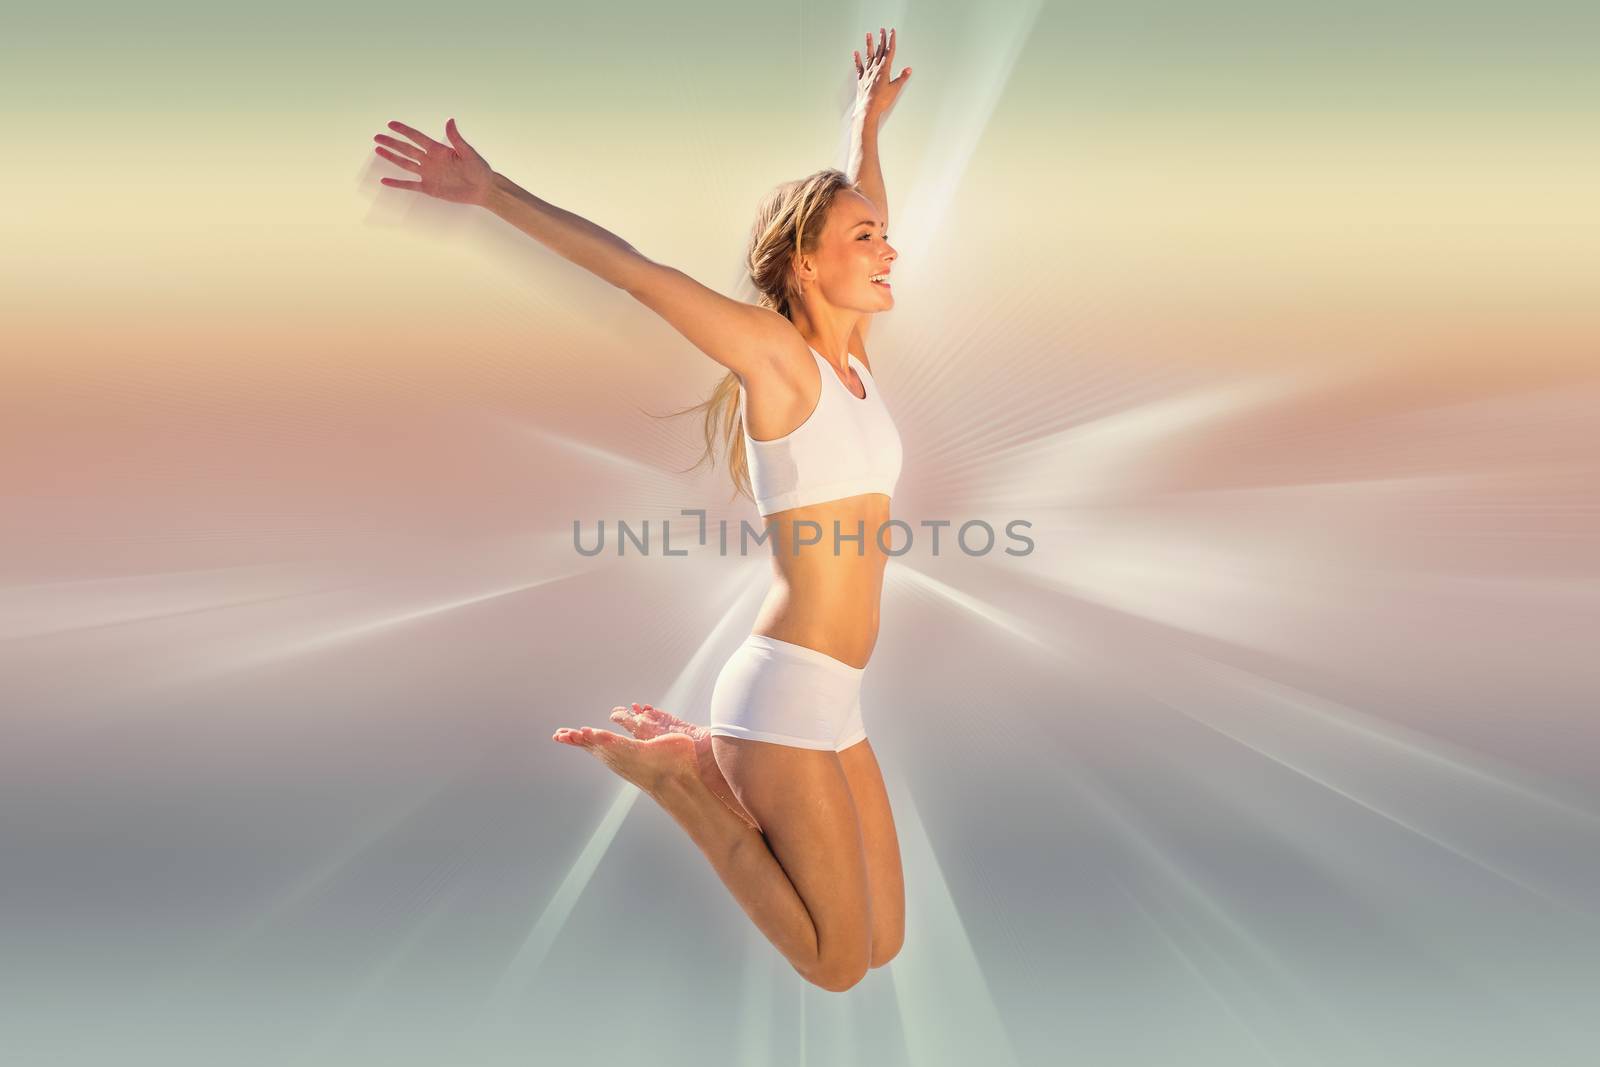 Gorgeous fit blonde jumping with arms out against abstract background